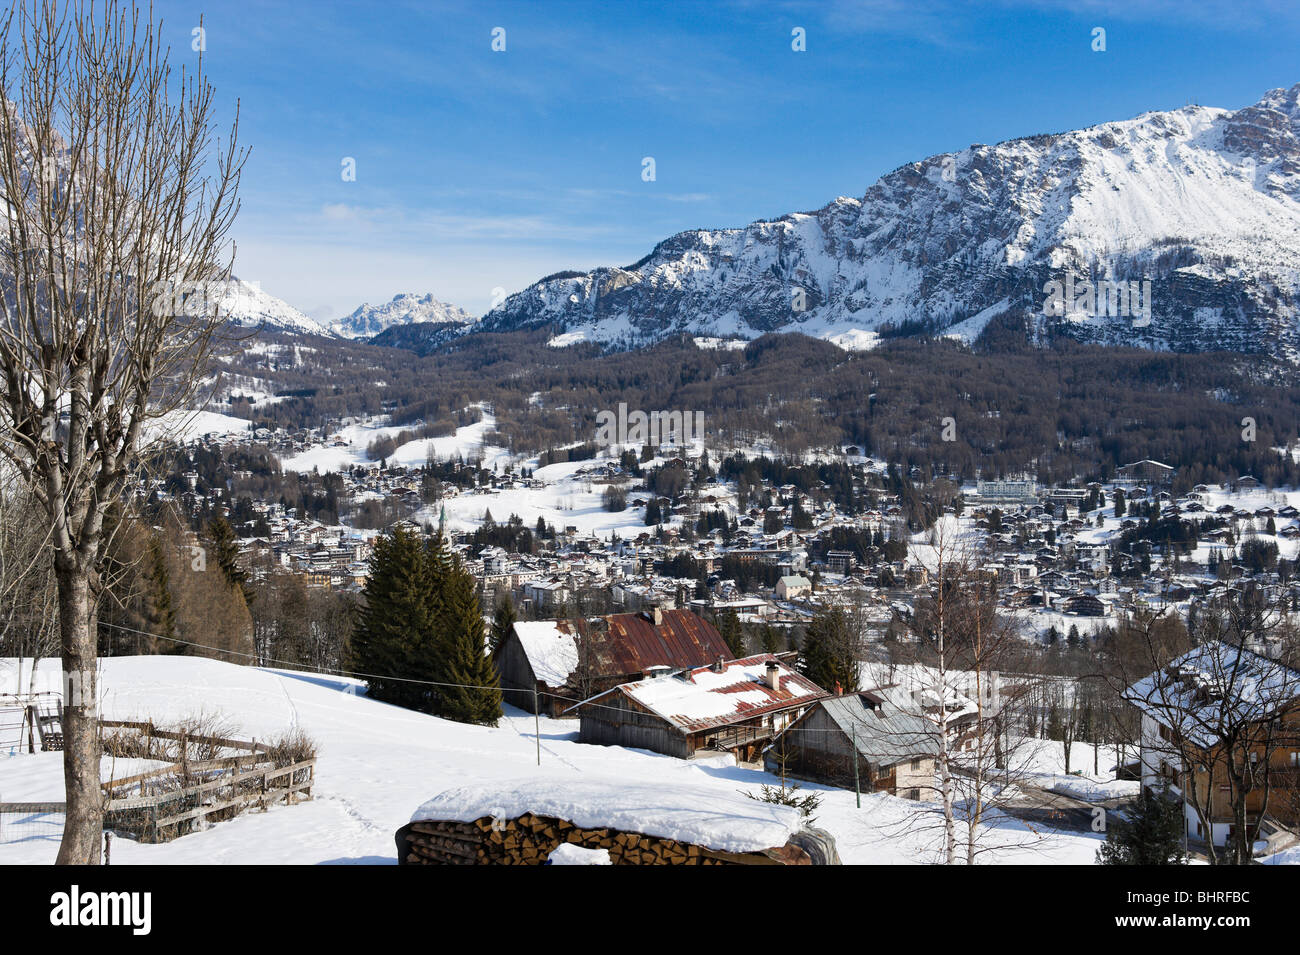 View over the roofs of the resort of Cortina d'Ampezzo, Dolomites, Italy Stock Photo